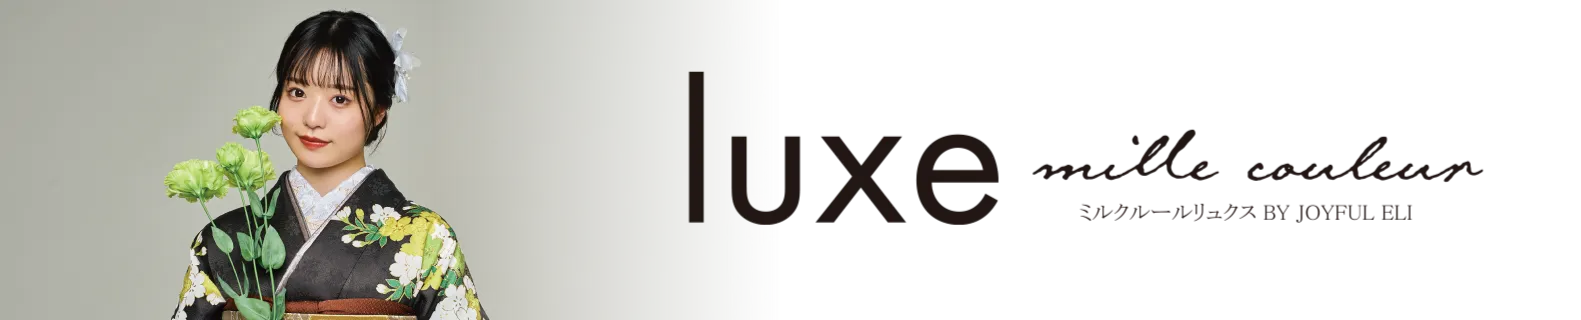 luxe